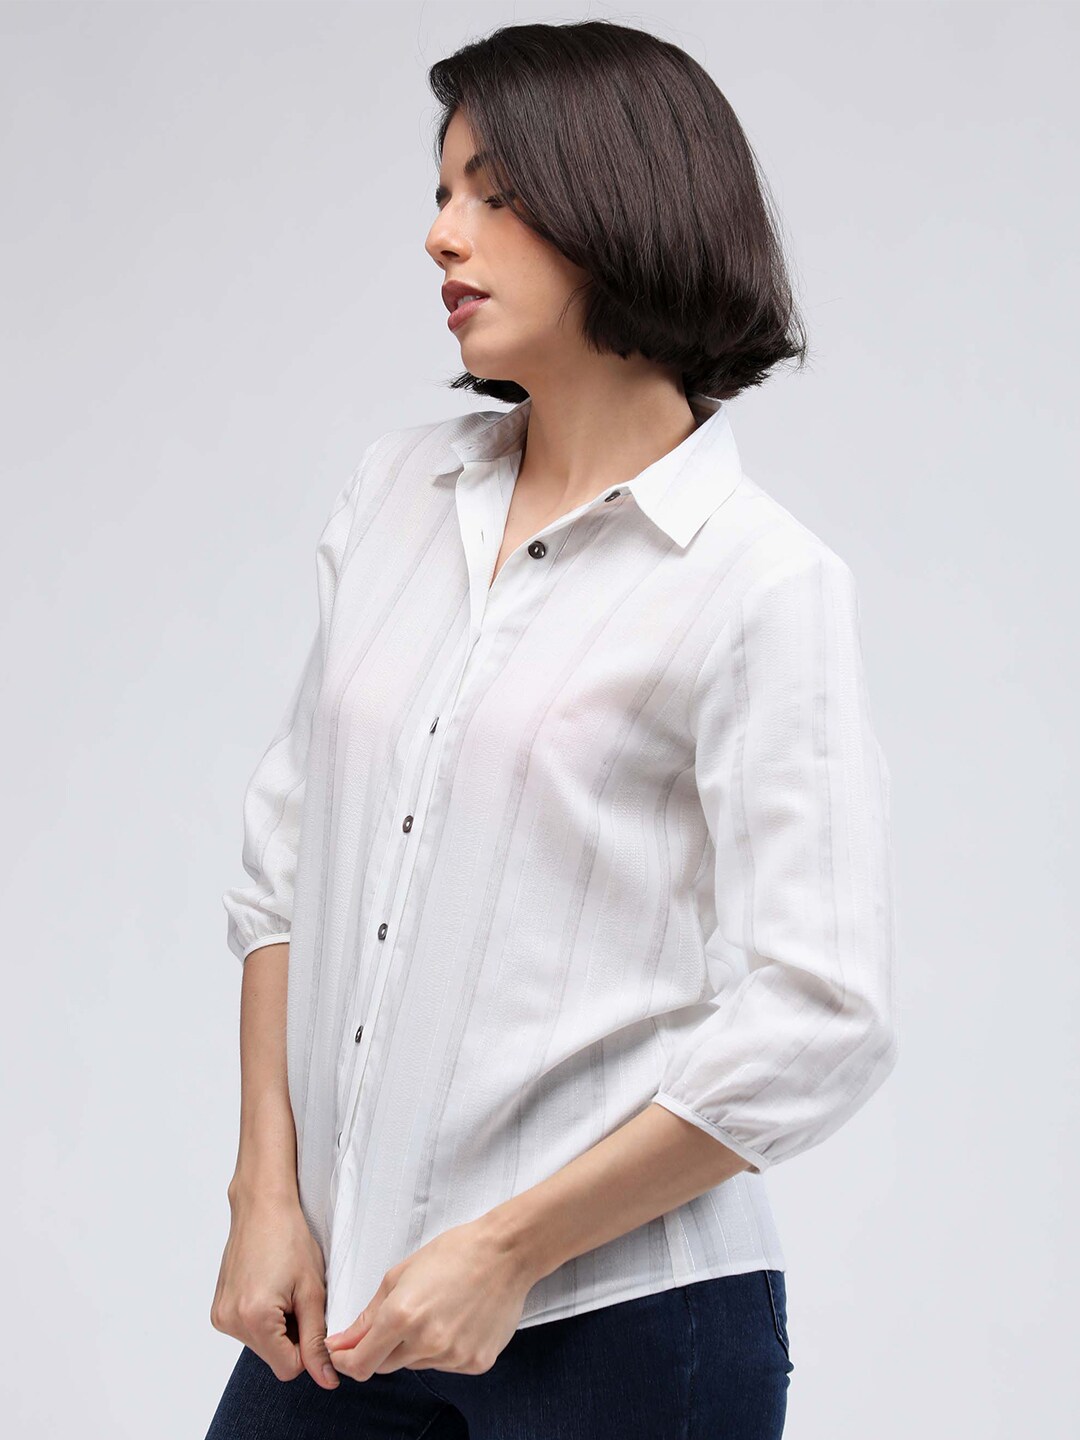 IDK Women White Striped Shirt Style Top Price in India